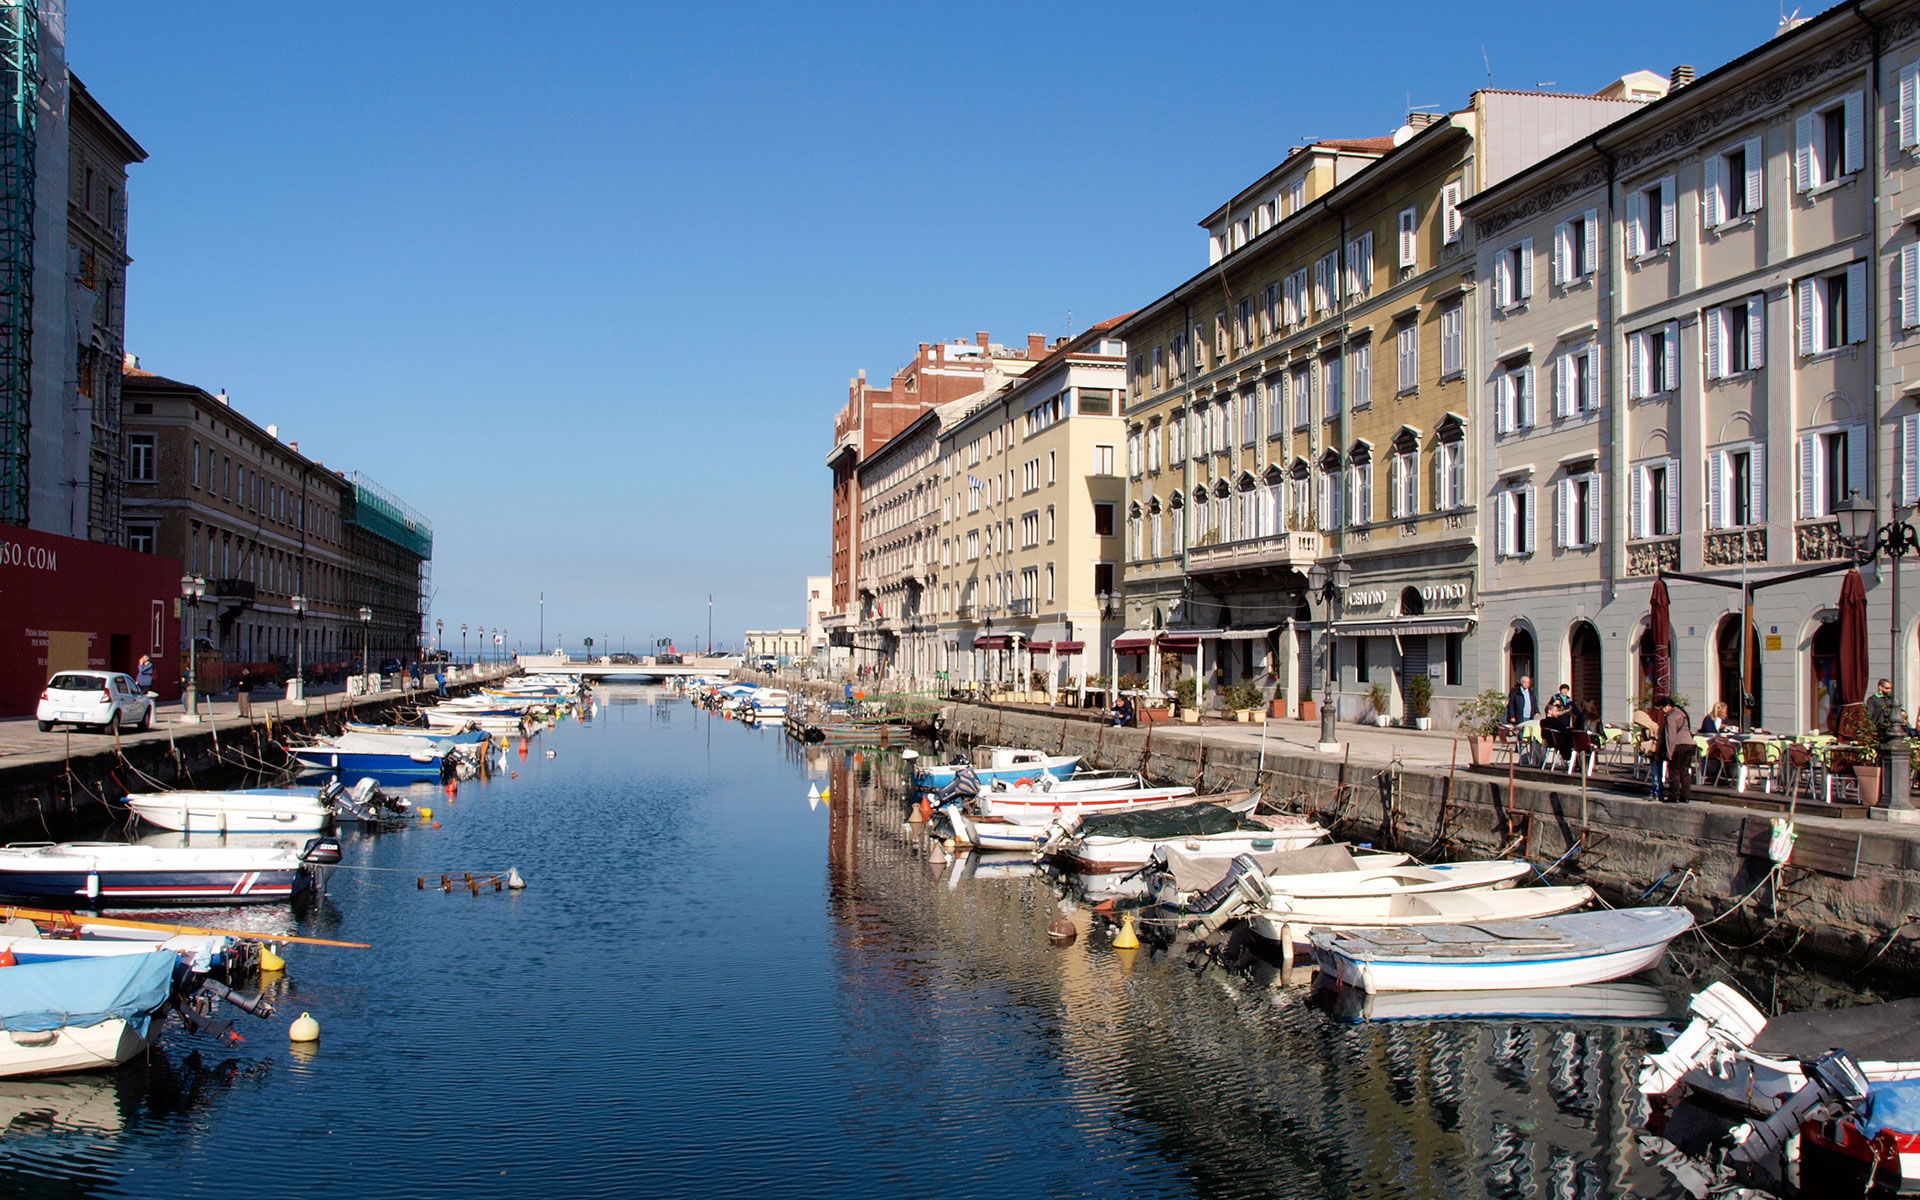 Vienna by the sea: the Adriatic port of Trieste (pictured here) has a dash of Habsburg style (photo © hidden europe).